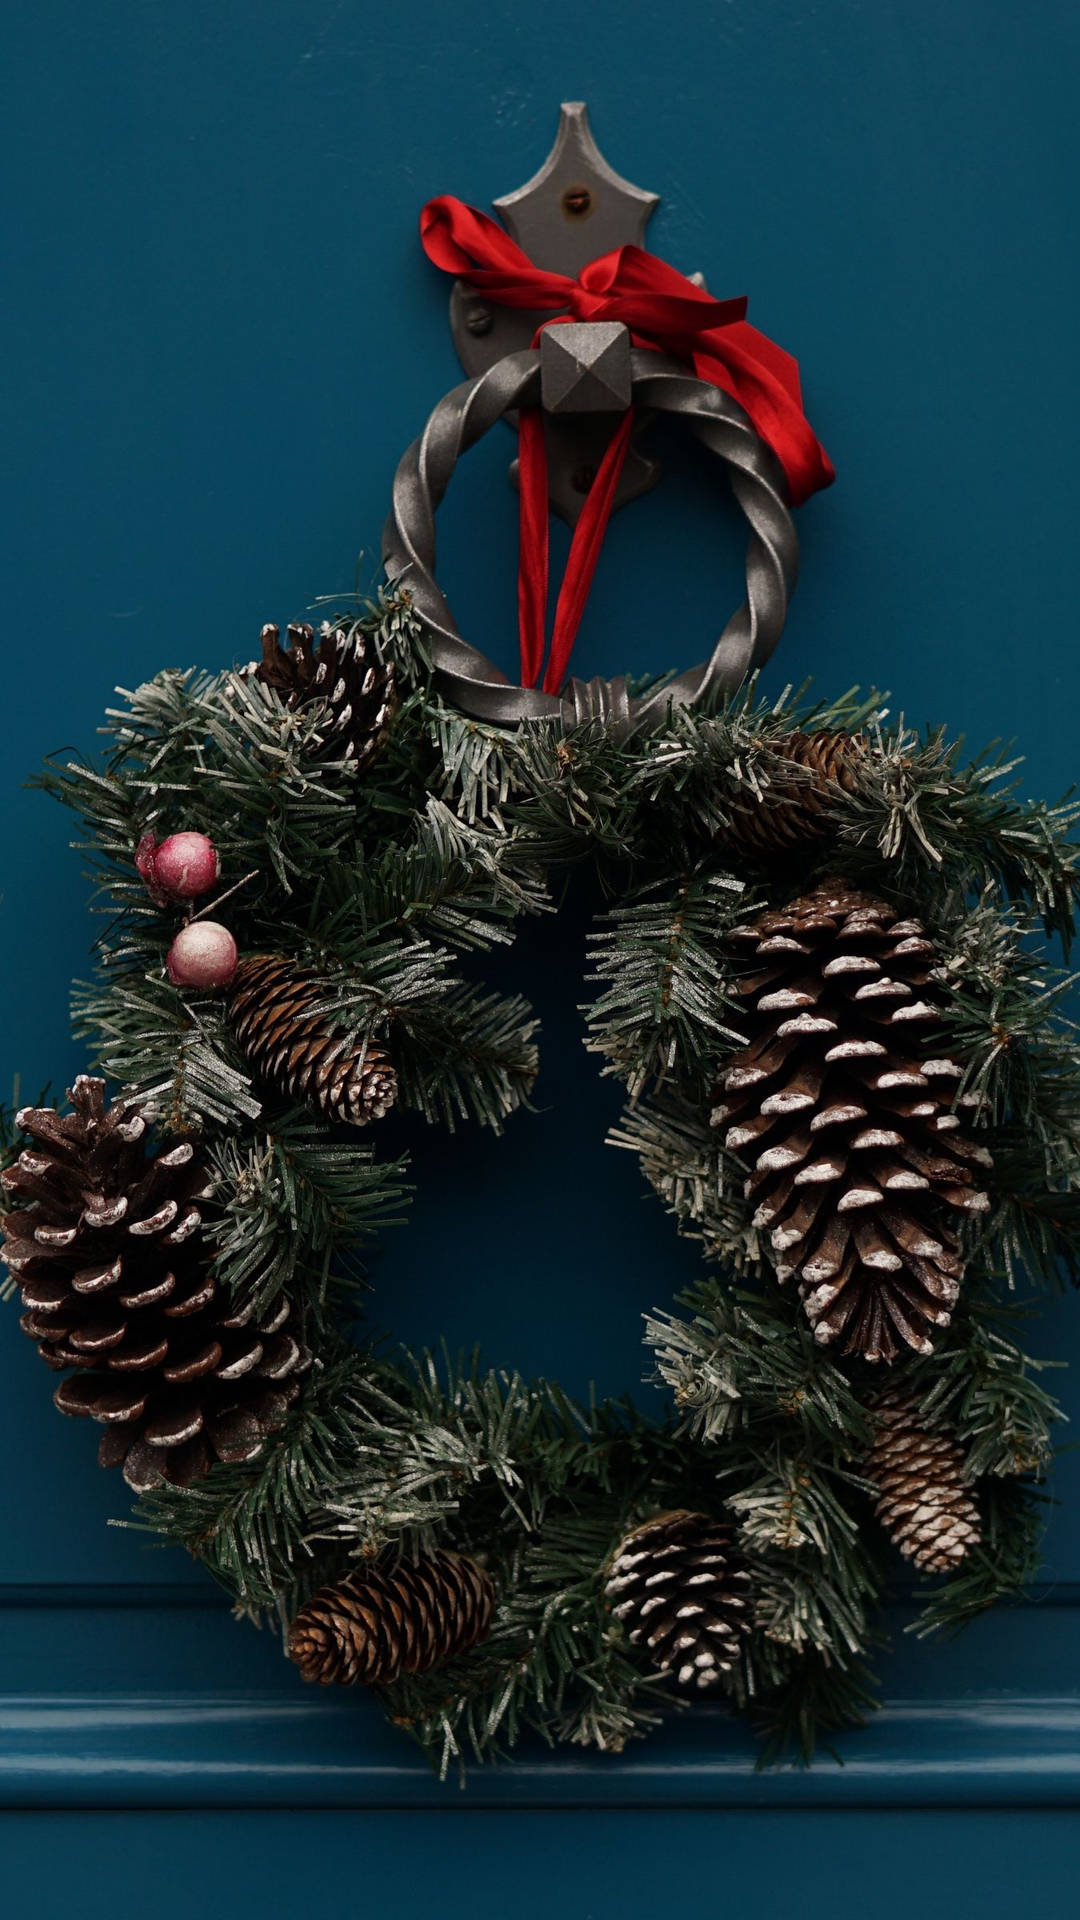 Caption: Festive Christmas Wreath Embellished with Pinecones Wallpaper